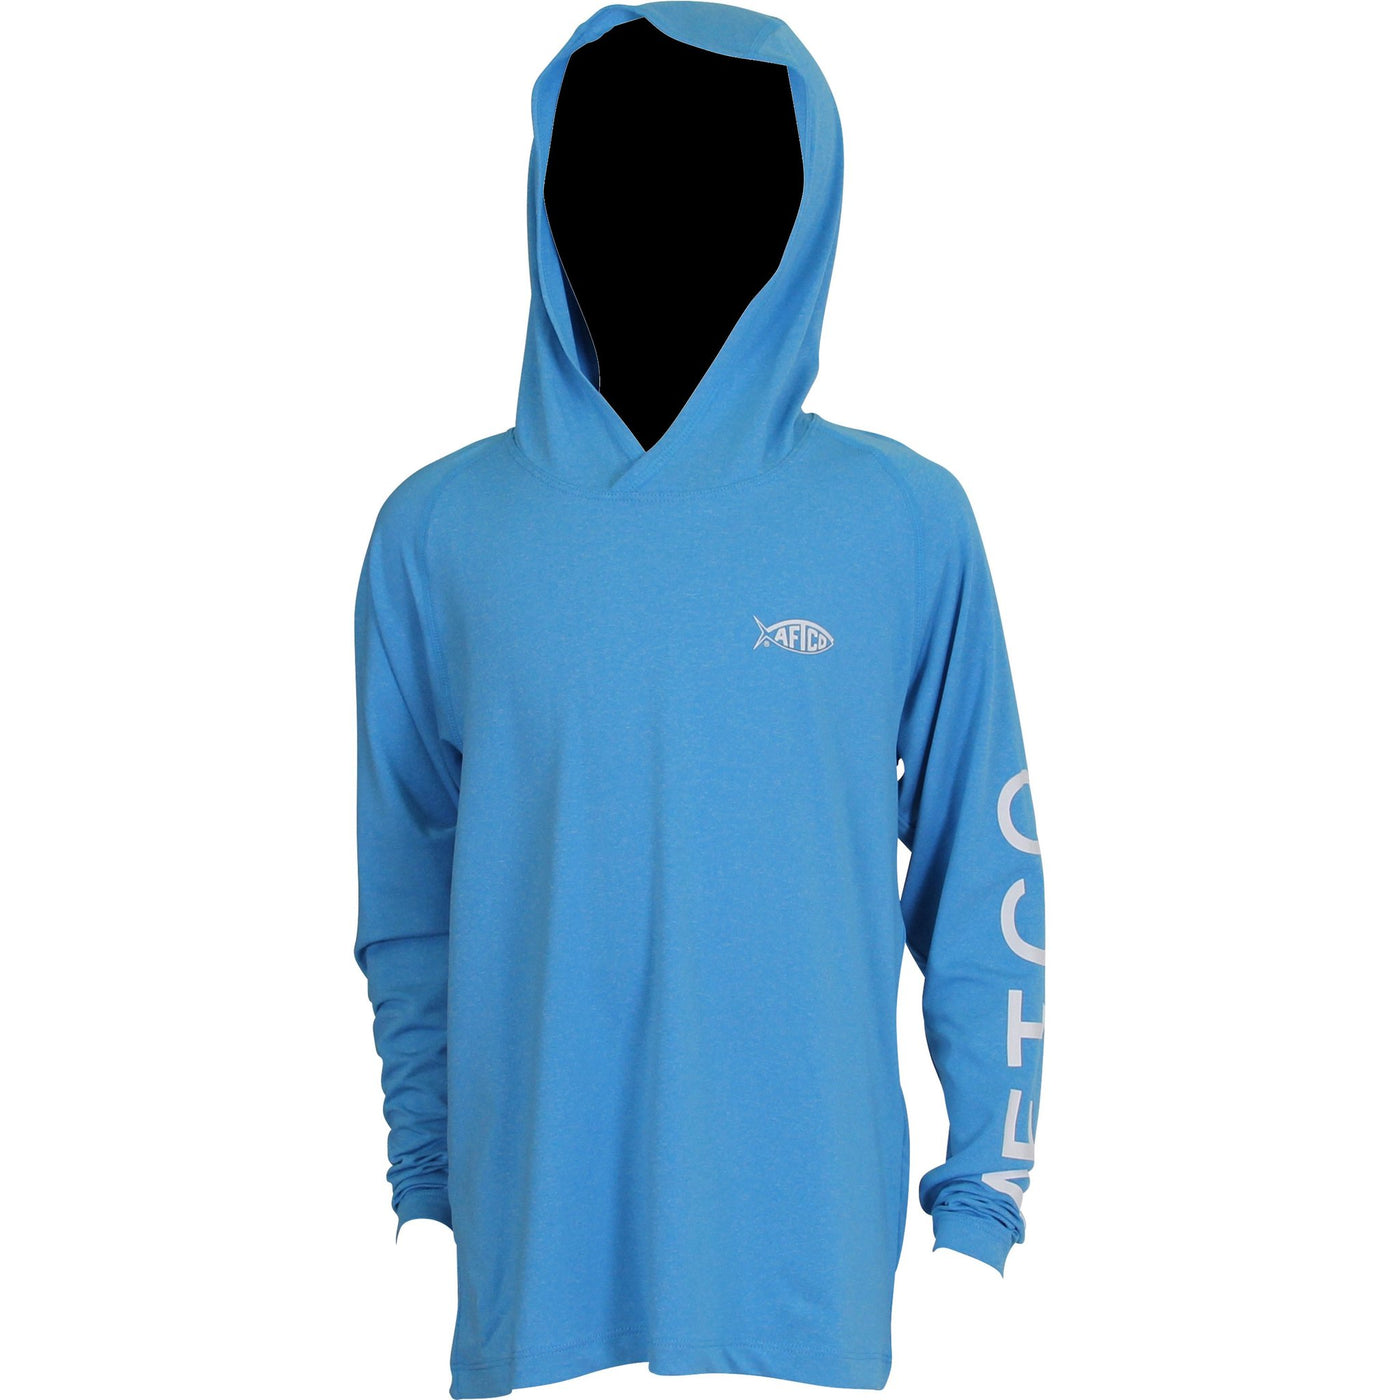 AFTCO Youth Samurai Performance Hoodie-CHILDRENS CLOTHING-Vivid Blue-S-Kevin's Fine Outdoor Gear & Apparel